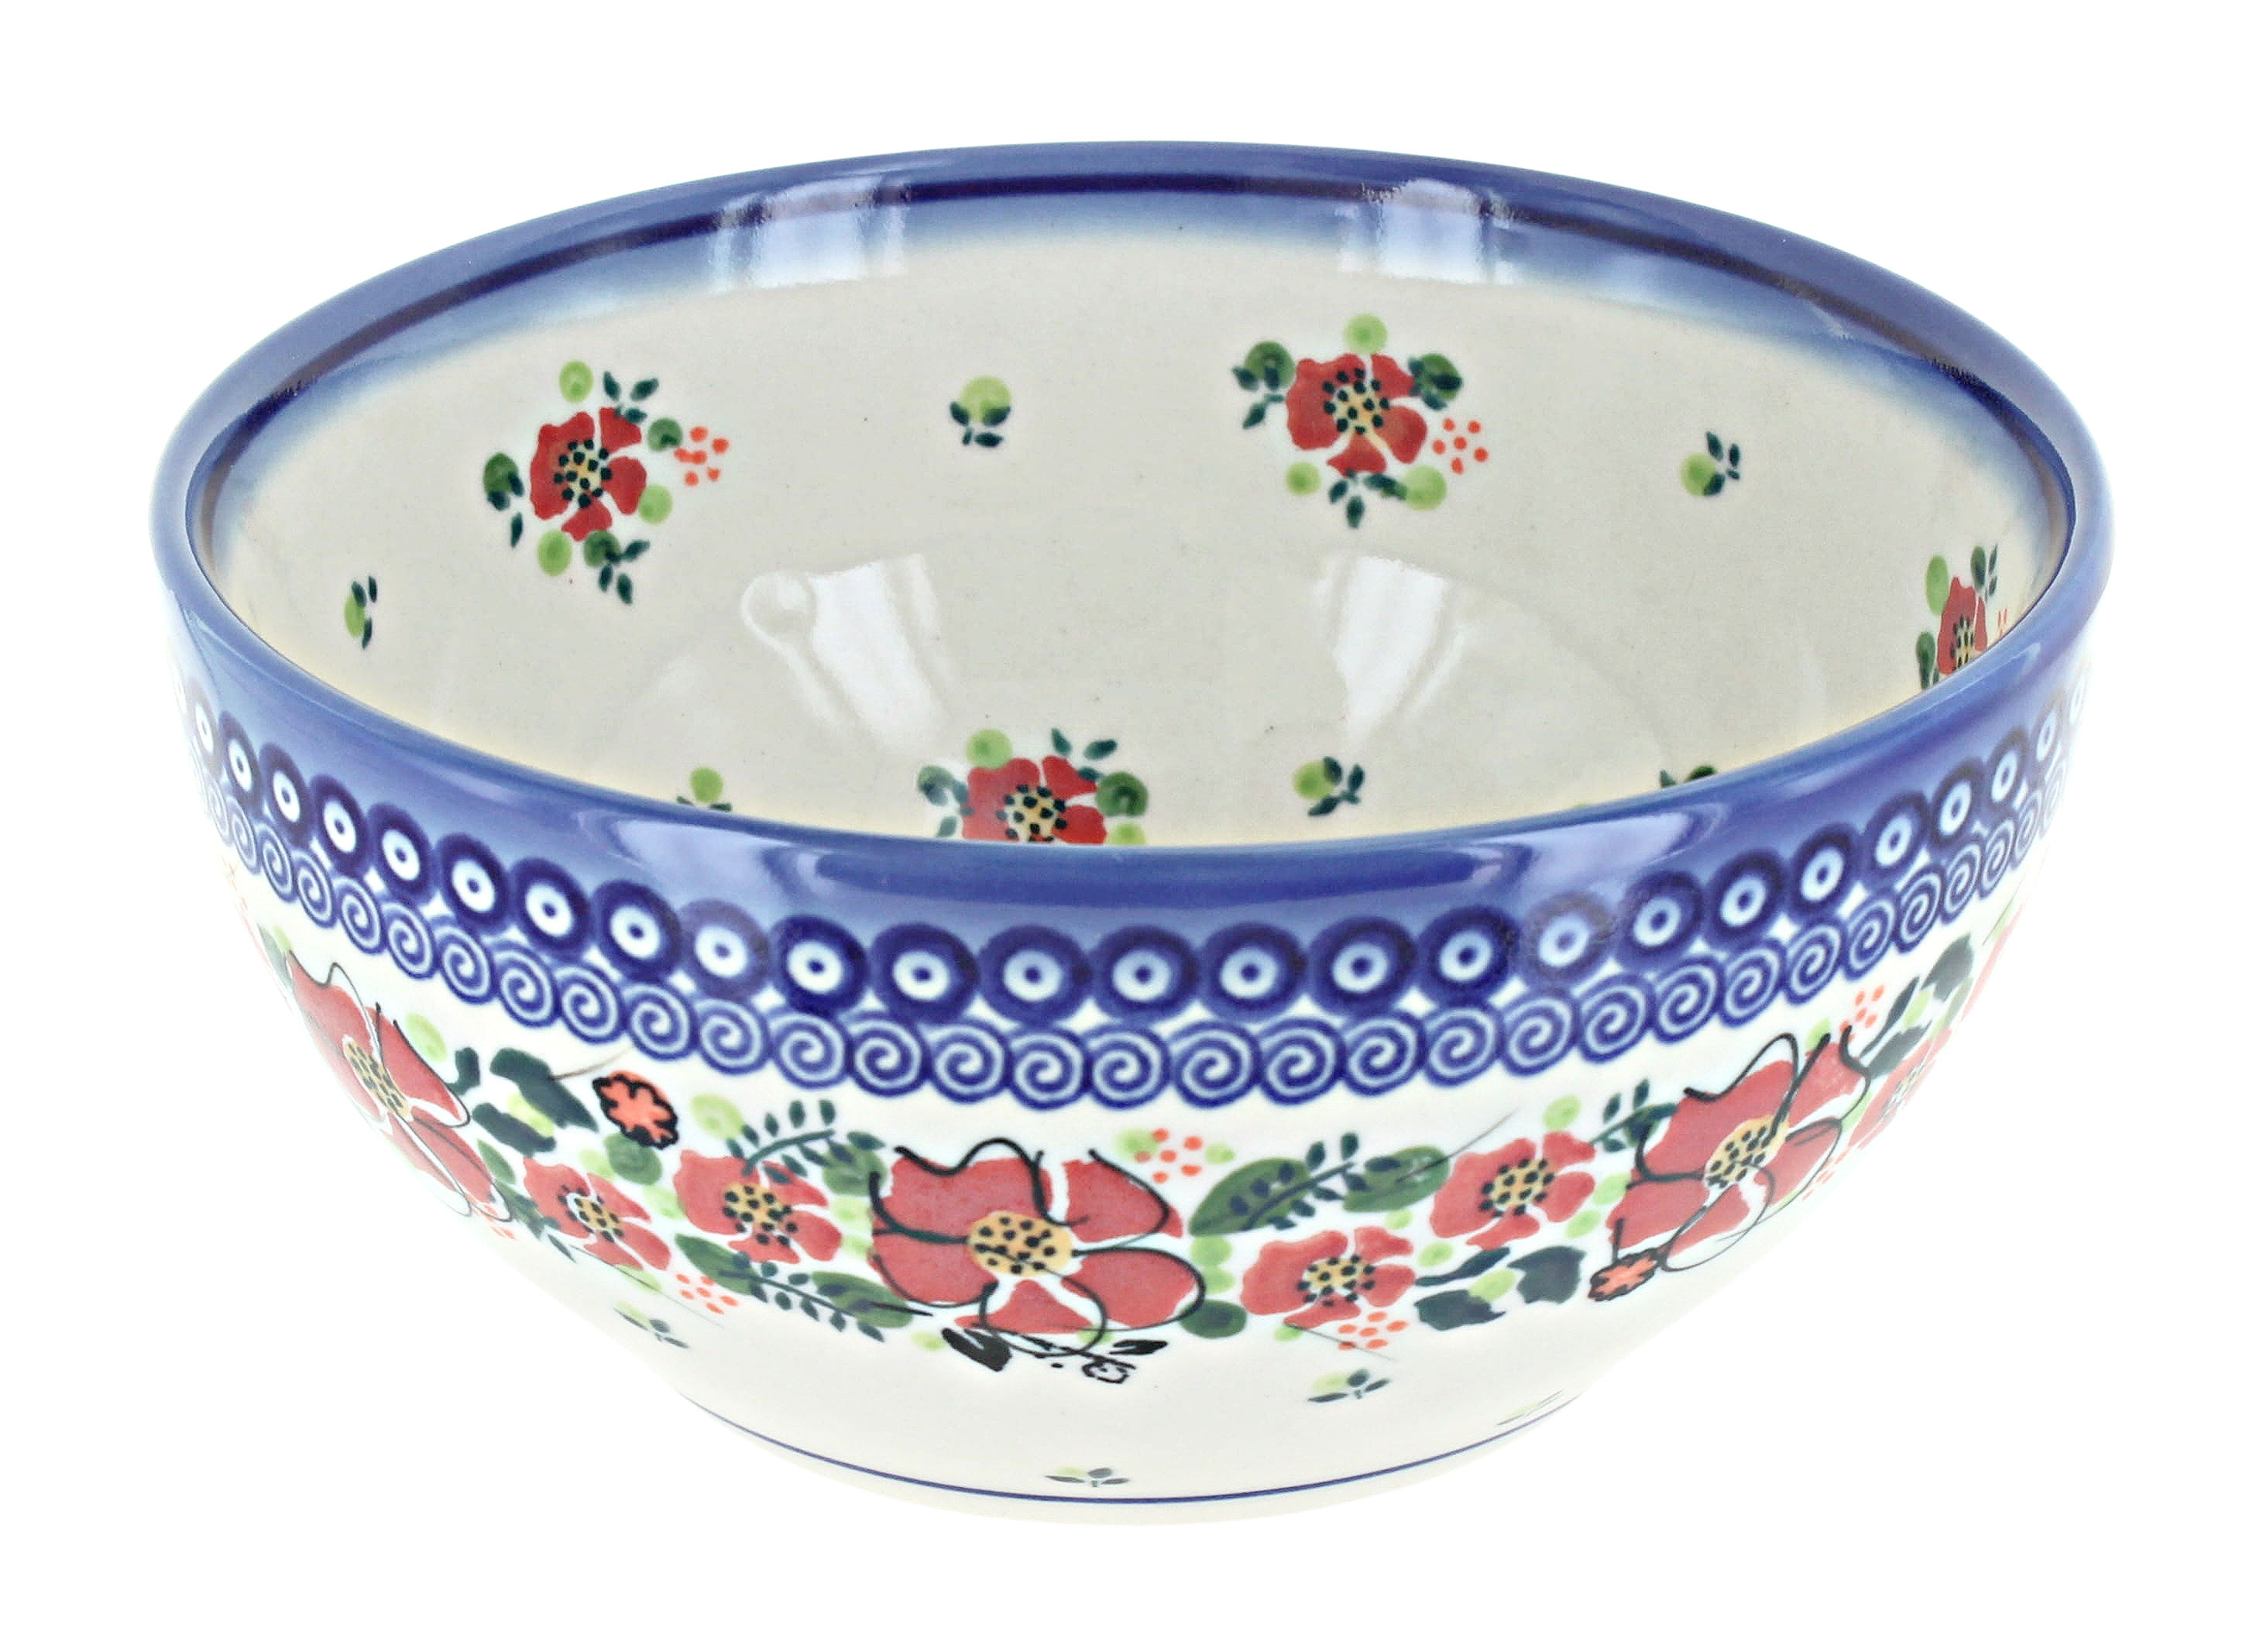 Blue Rose Polish Pottery Floral Butterfly Large Mixing Bowl, 1